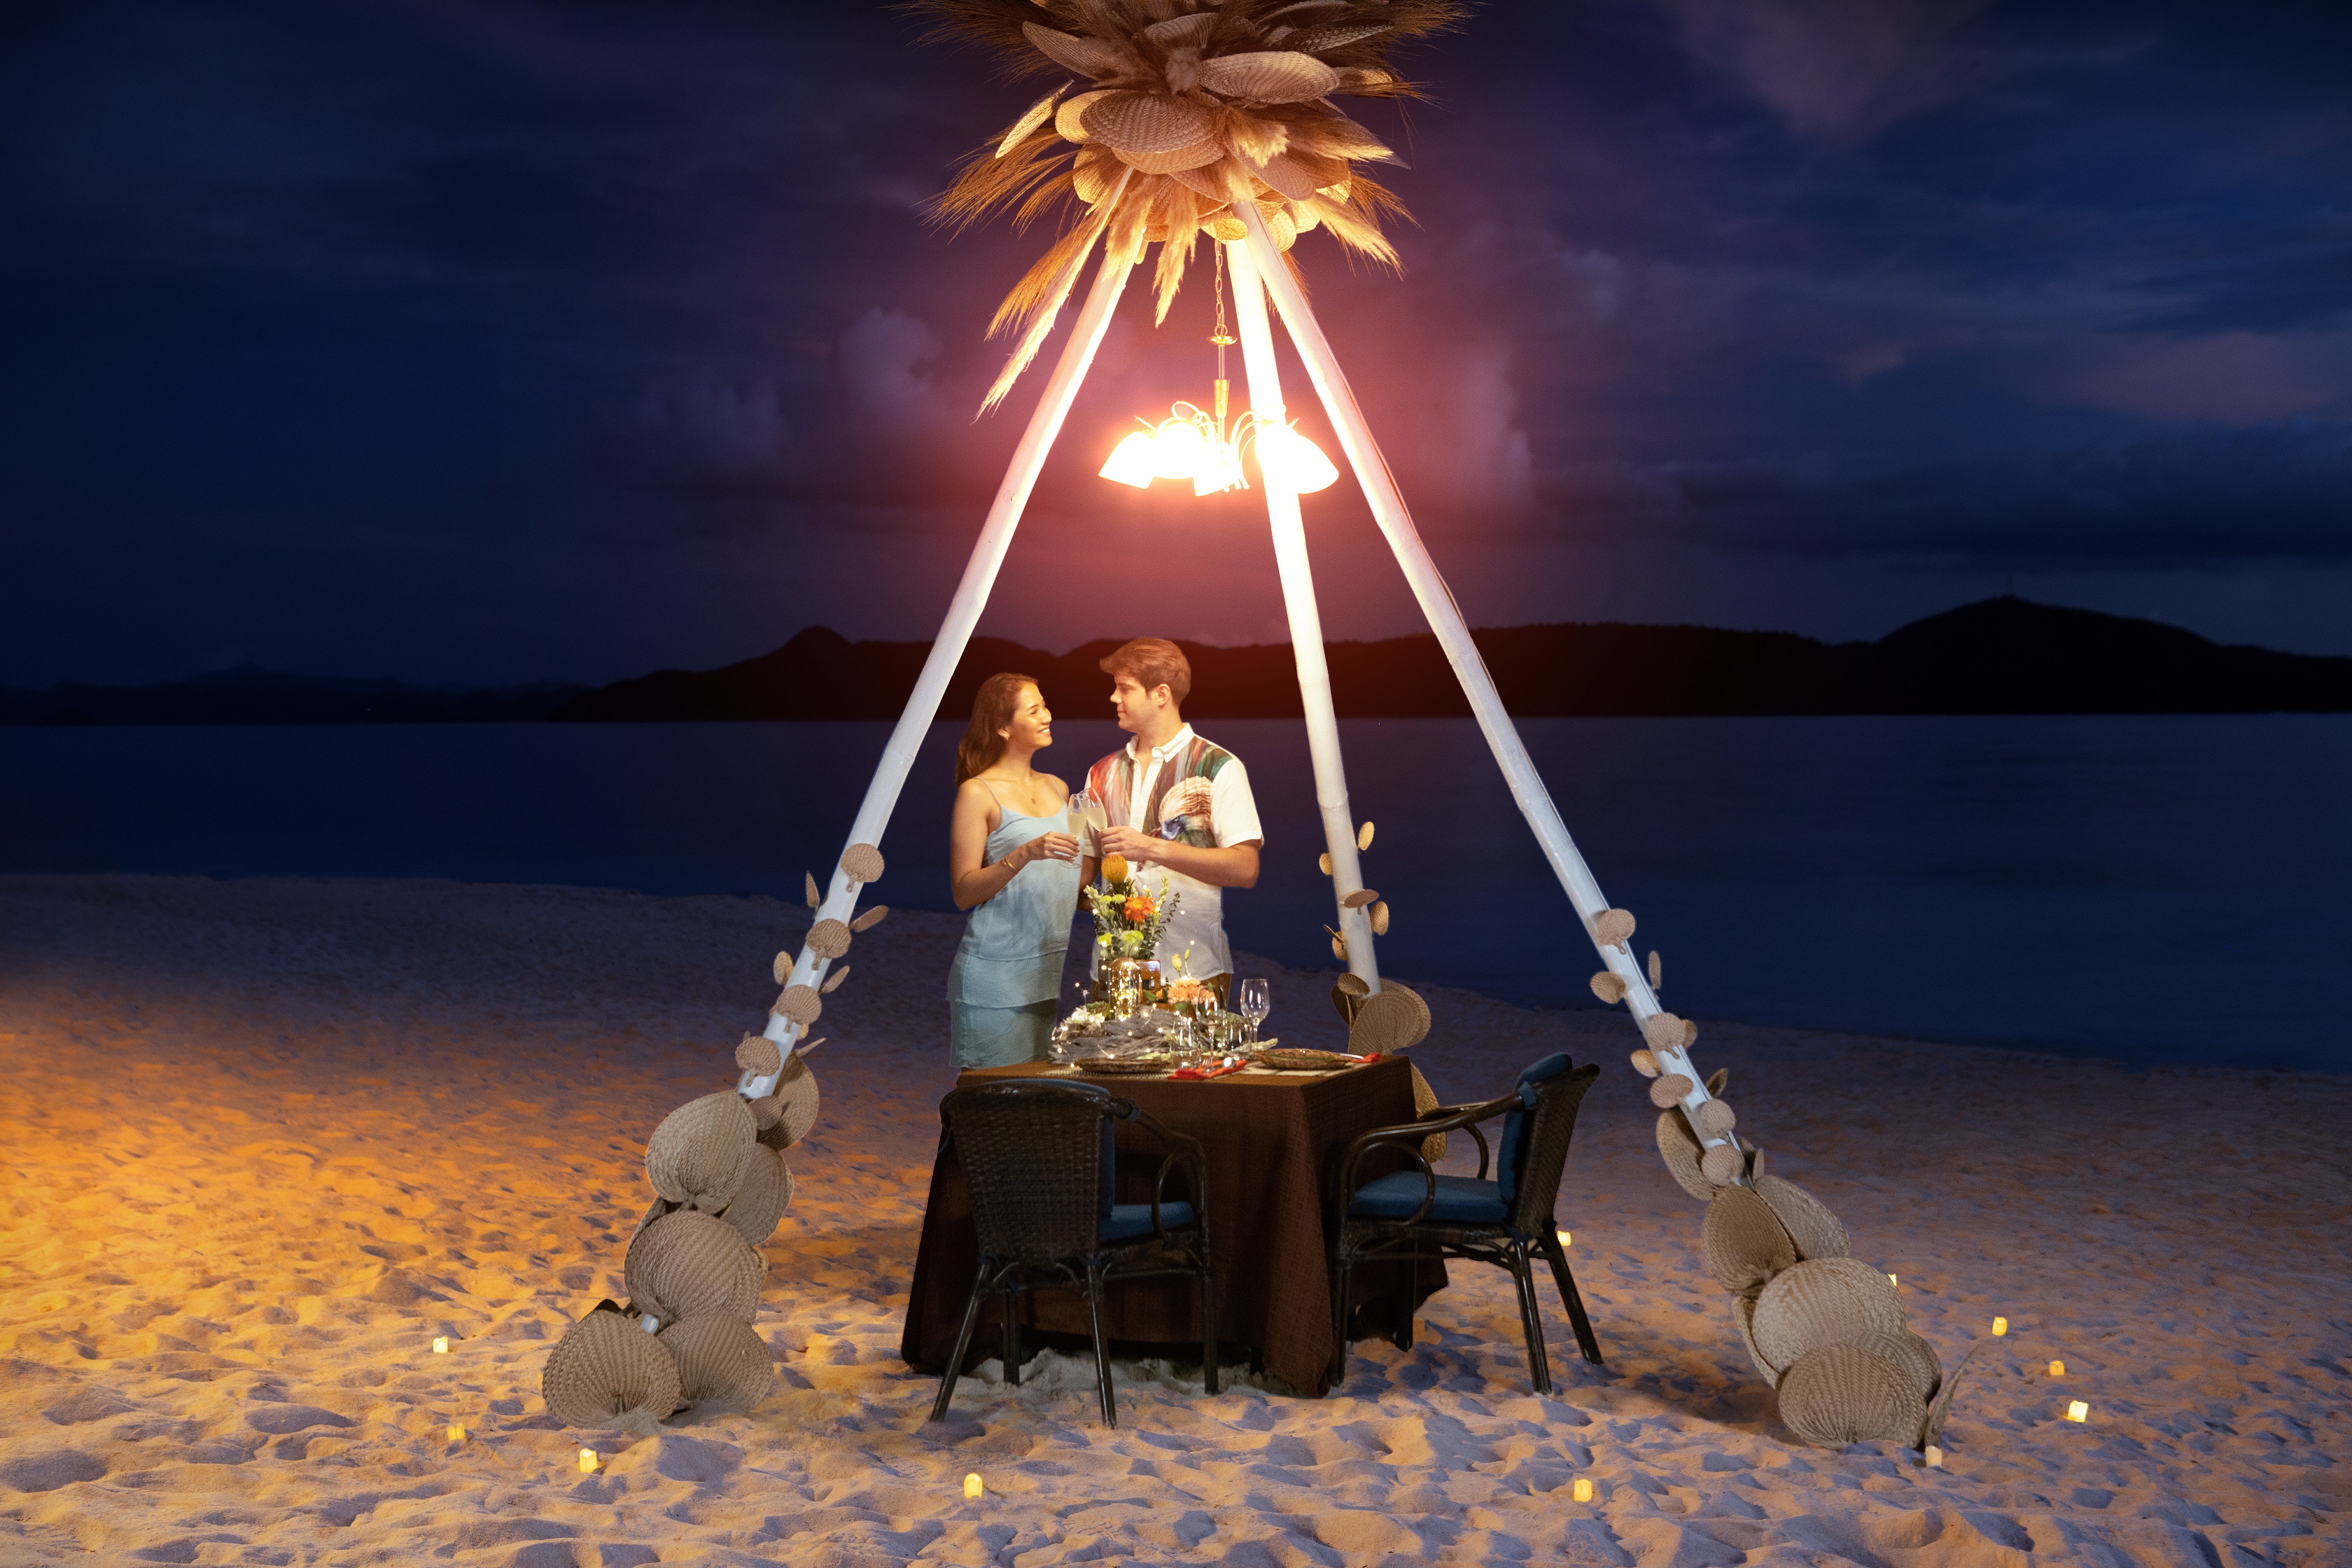 Dine under the stars amidst a romantic setting for two at Club Paradise Palawan.